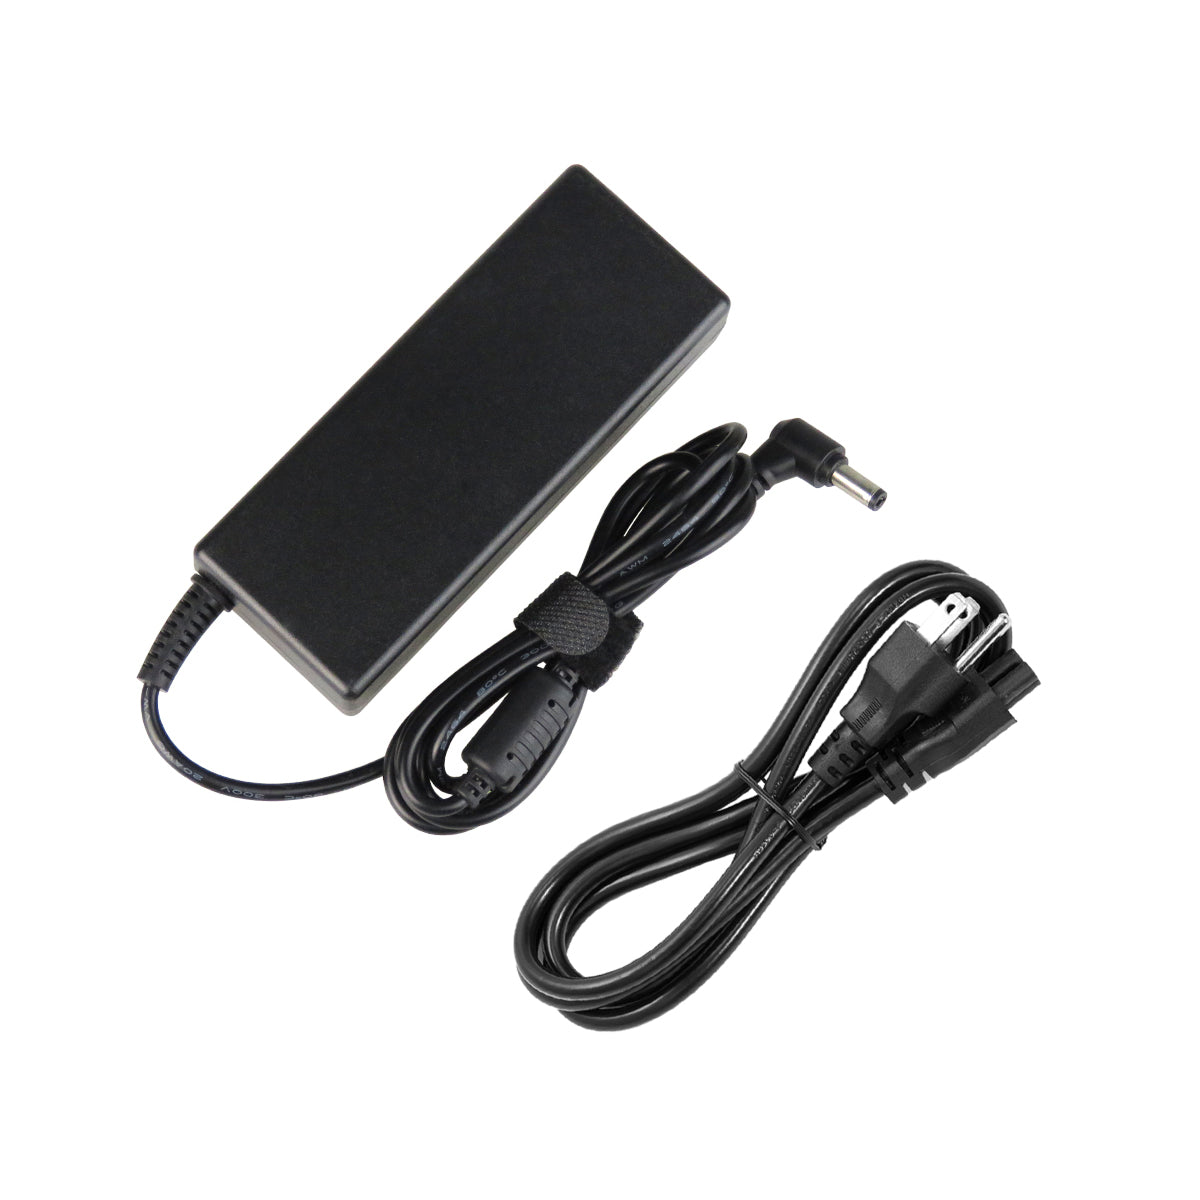 AC Adapter Charger for ASUS Q400 Notebook.